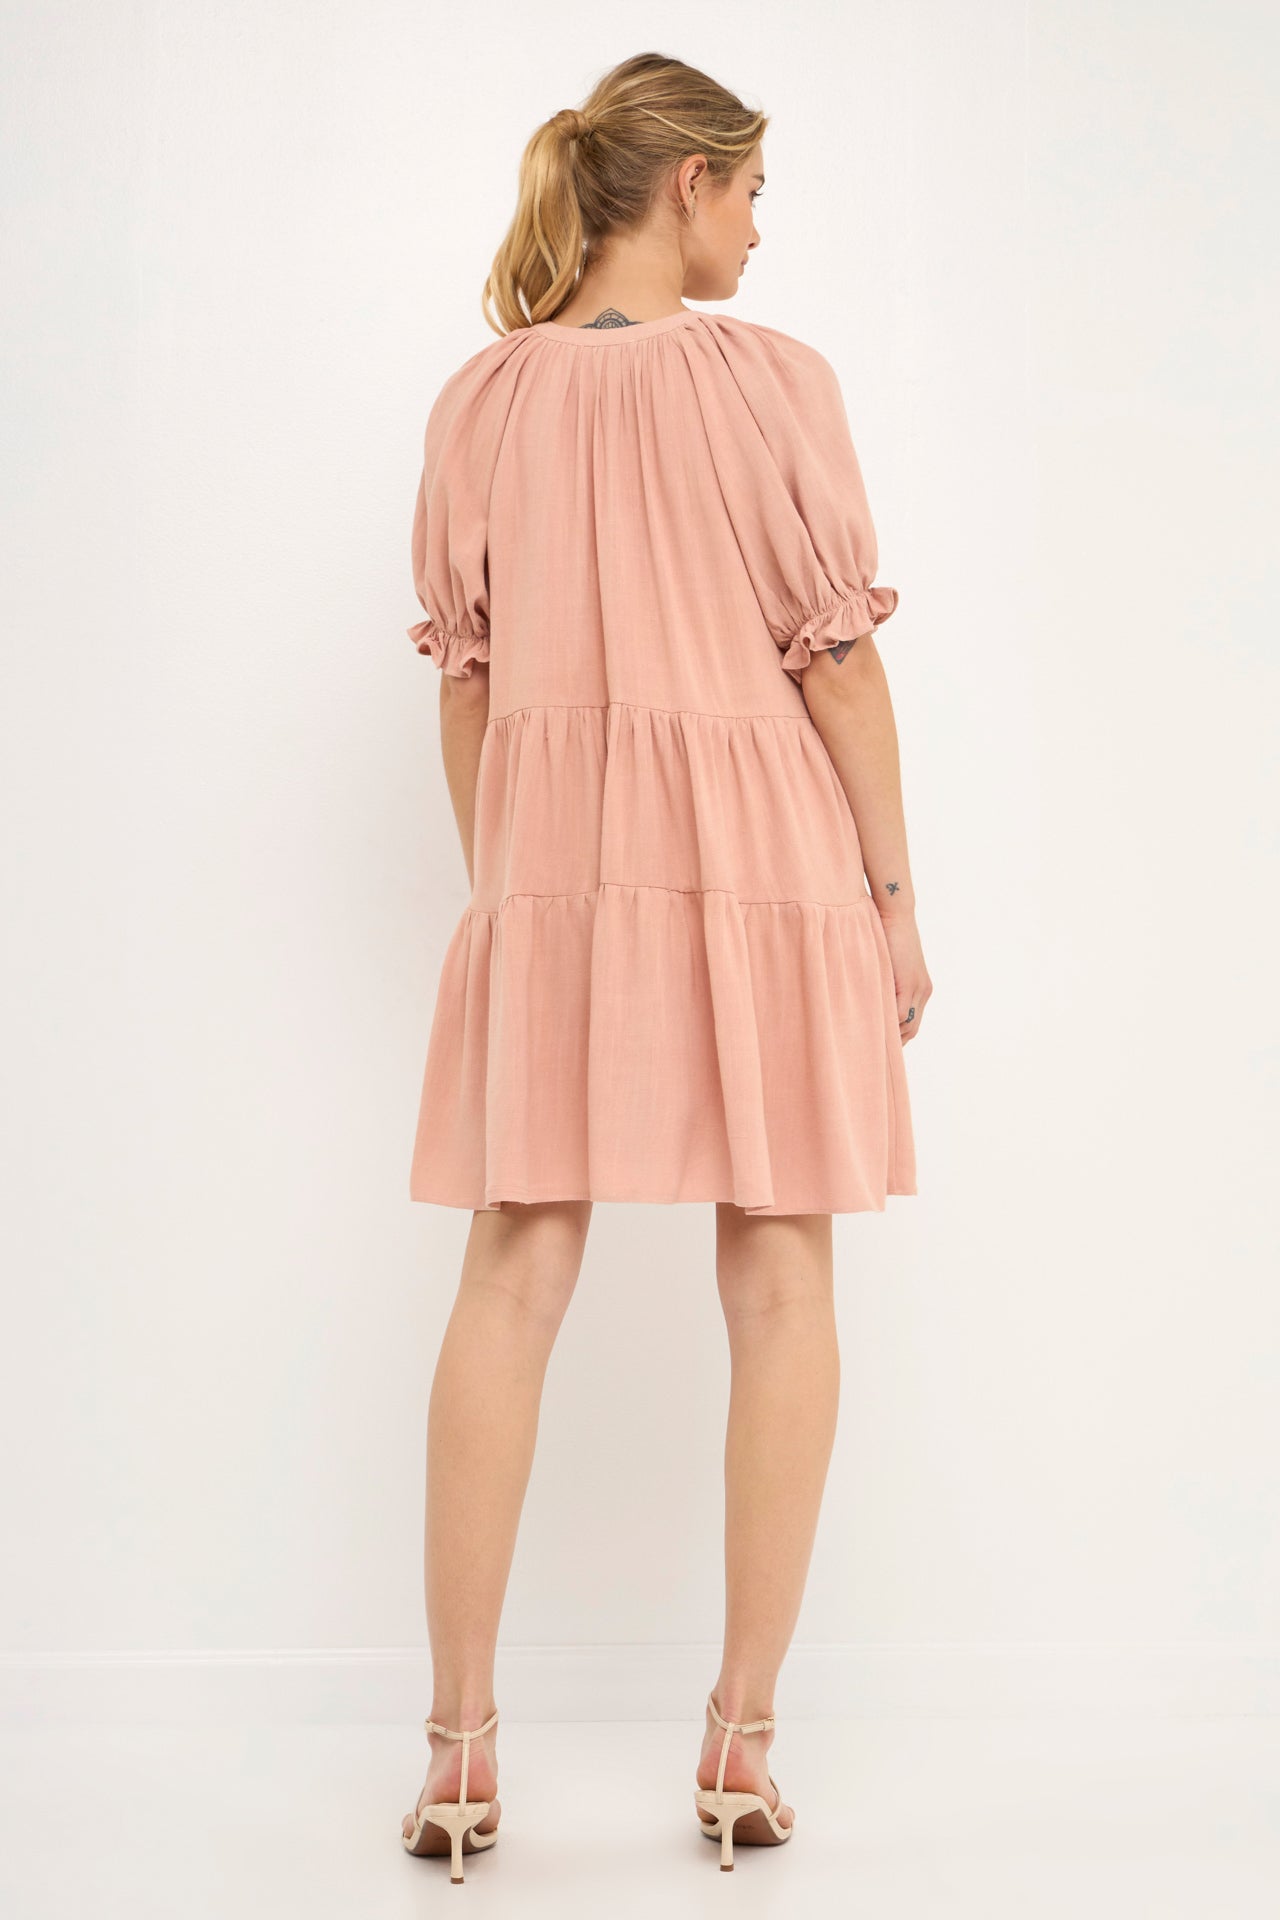 FREE THE ROSES - Solid Tiered Dress With Ruffled Sleeves - DRESSES available at Objectrare